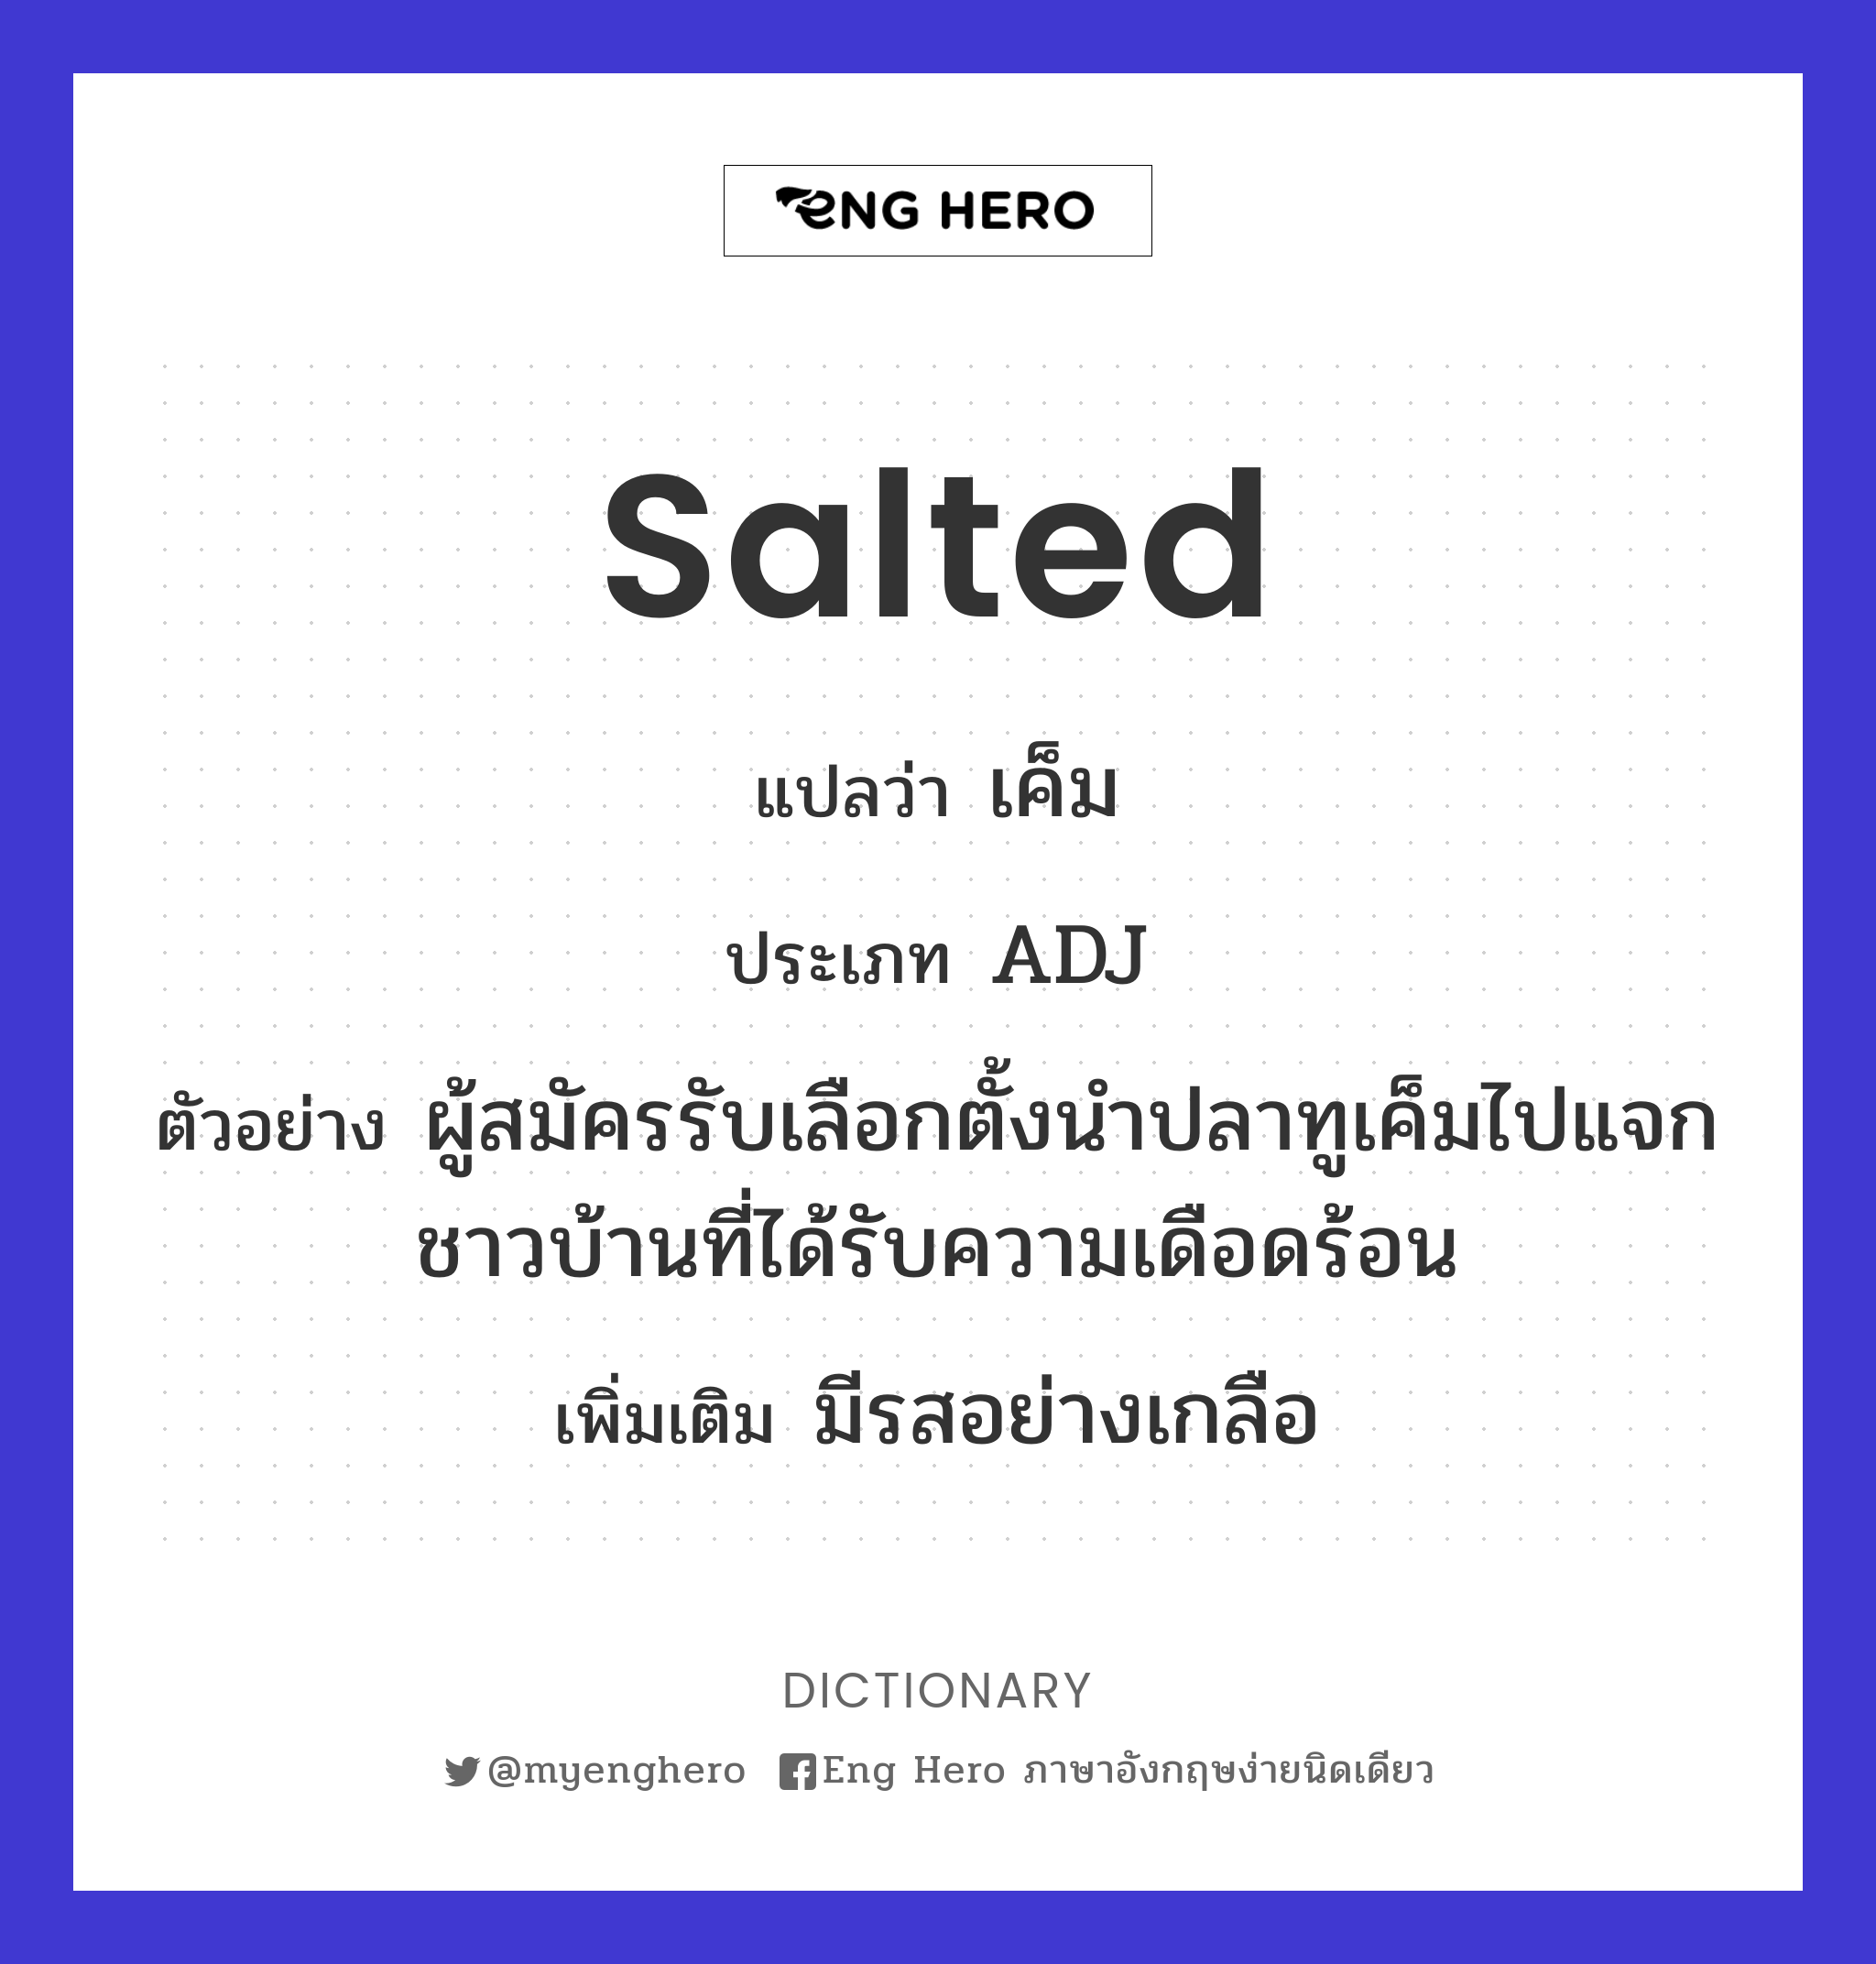 salted